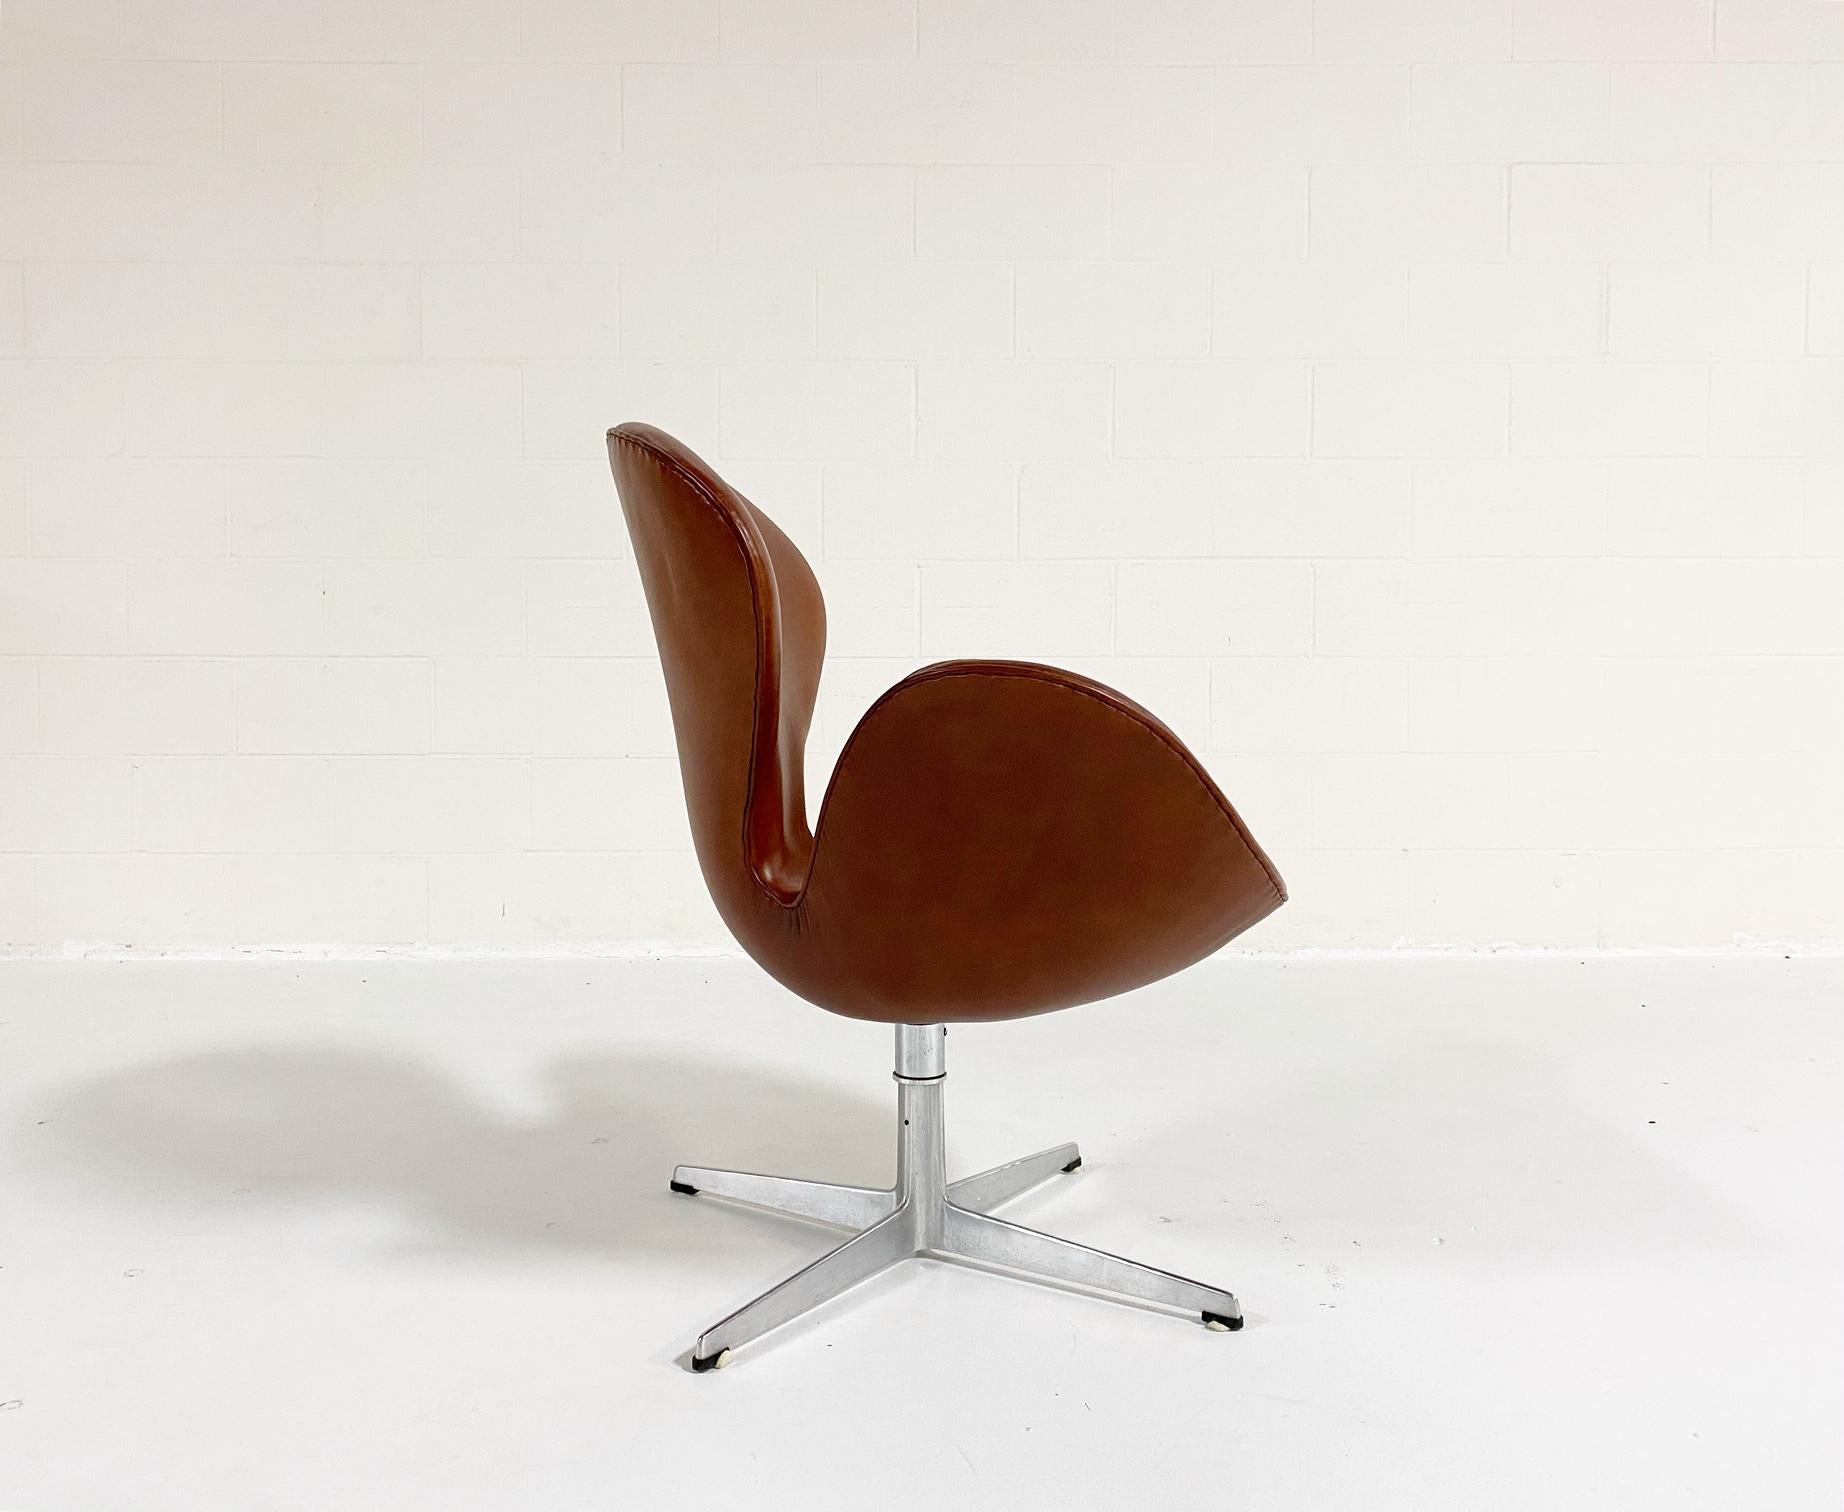 The Forsyth team was over the moon when we collected this amazing, original Arne Jacobsen Model 1265 